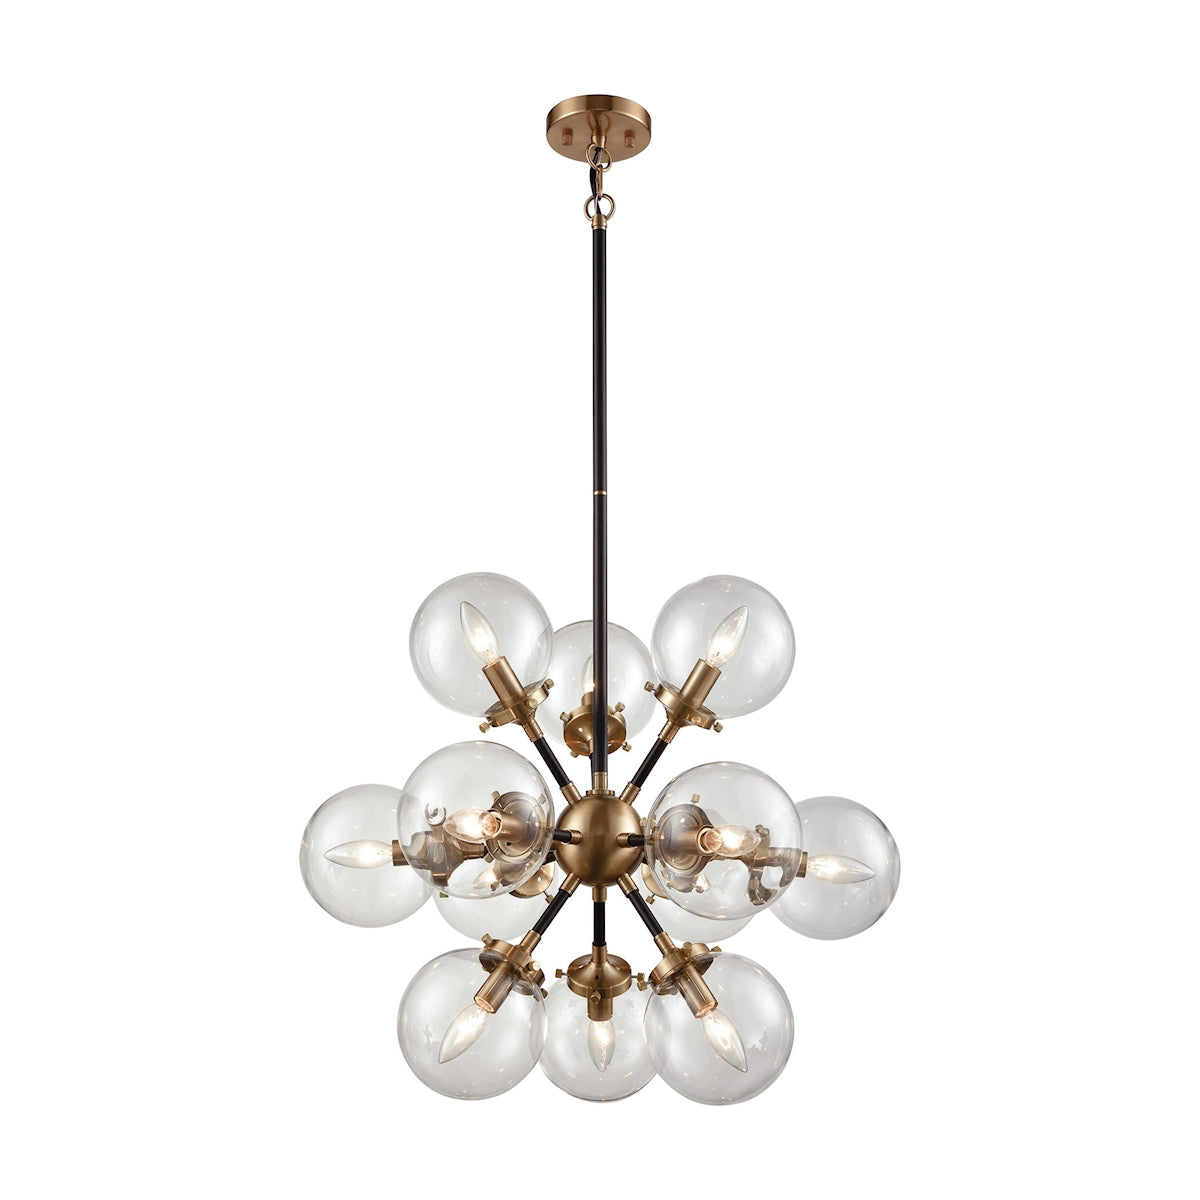 ELK Lighting 14434/12 Boudreaux 12-Light Chandelier in Antique Gold and Matte Black with Sphere-shaped Glass